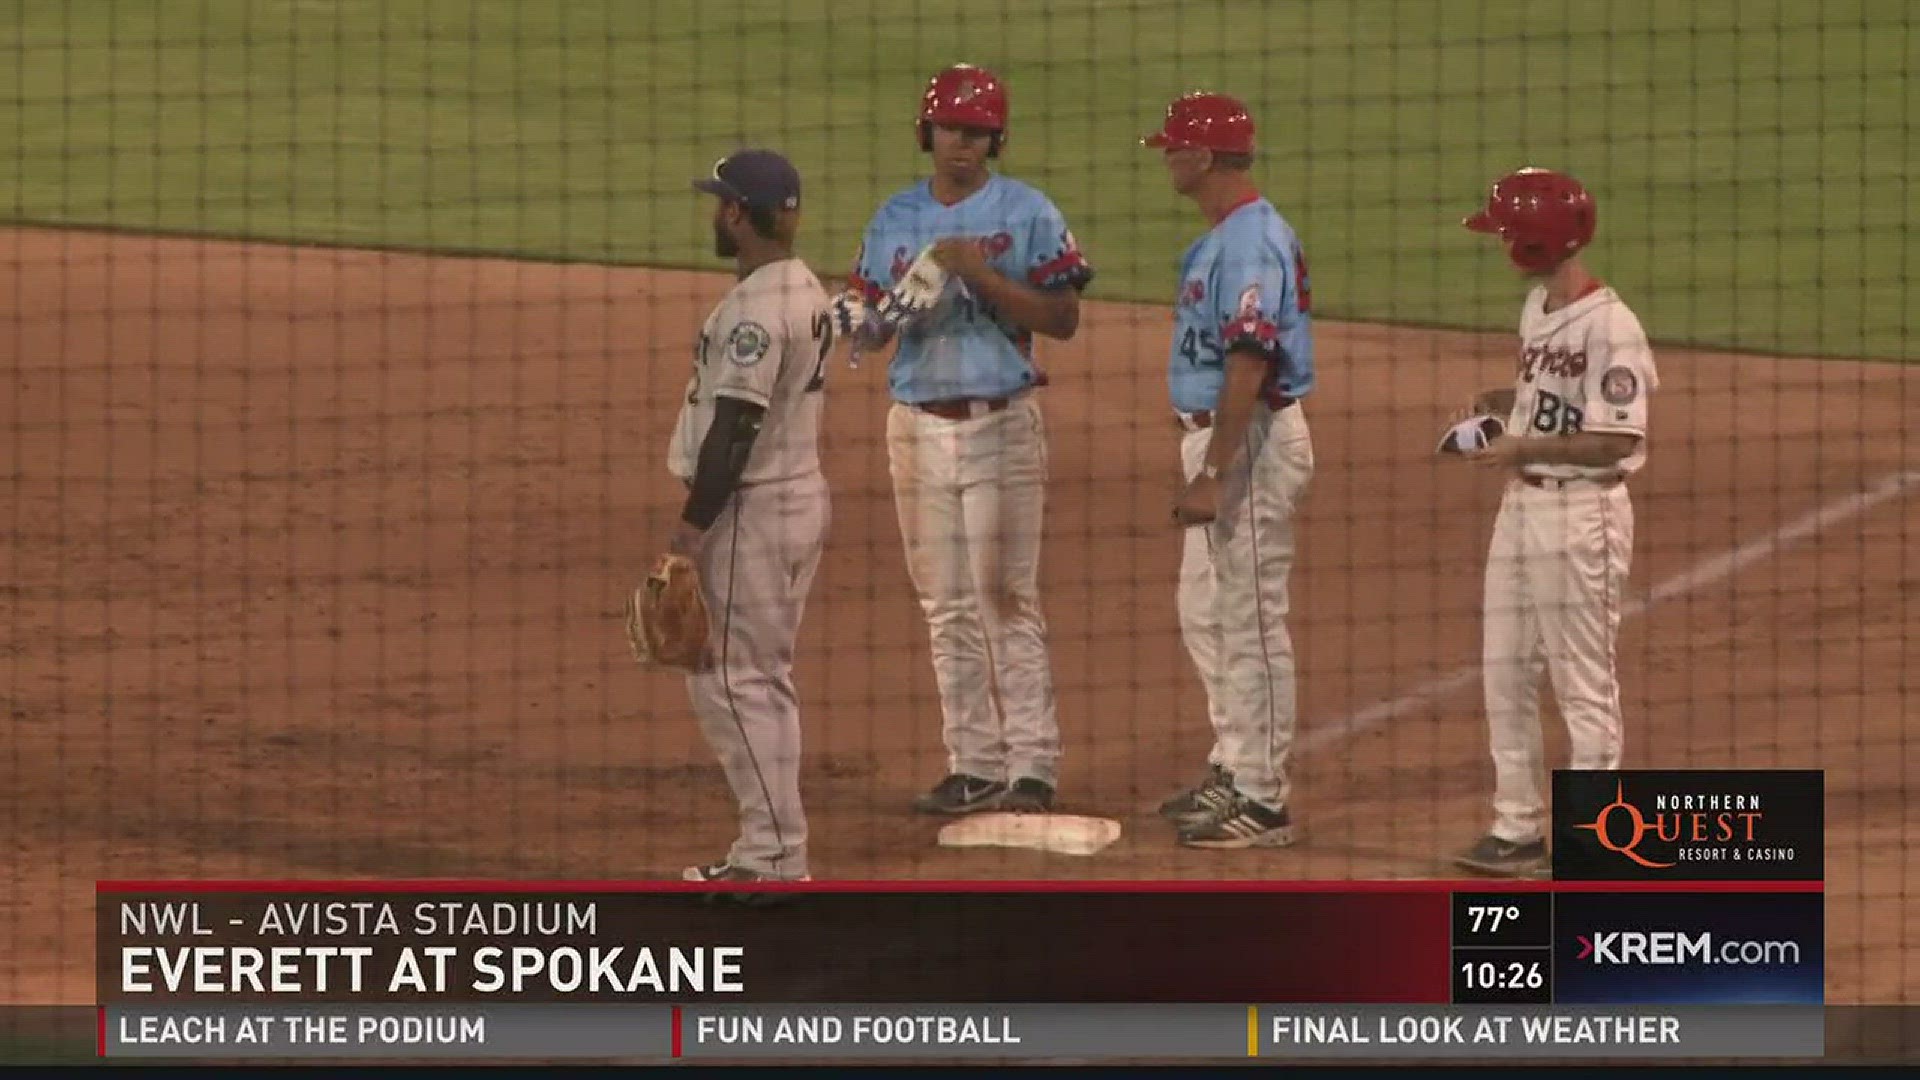 The Spokane Indians win the three-game series after beating Everett, 6-4, Thursday night.